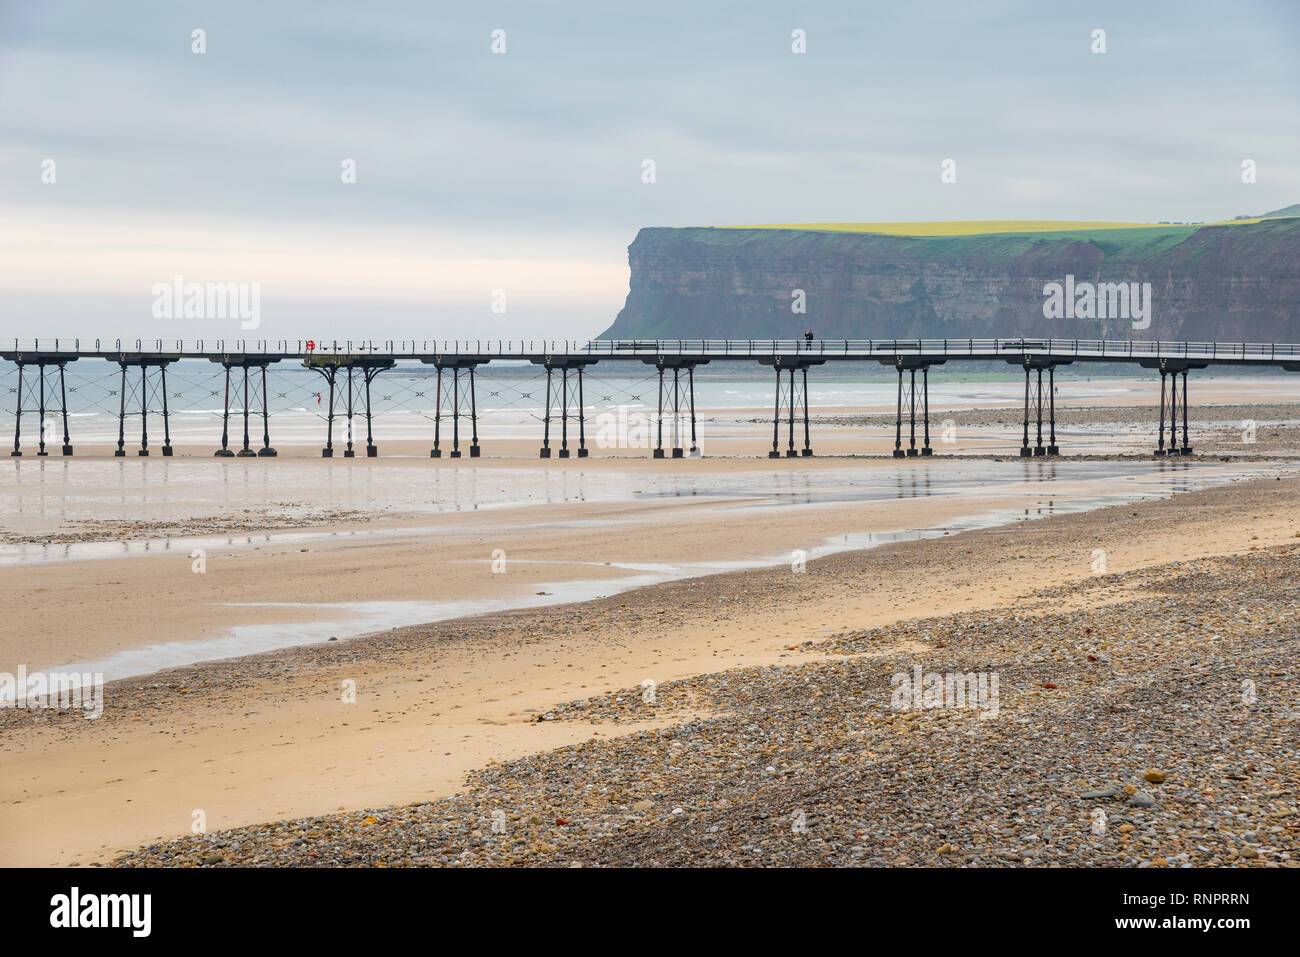 Historic pier at Saltburn-by-the-sea, North Yorkshire, England Stock Photo